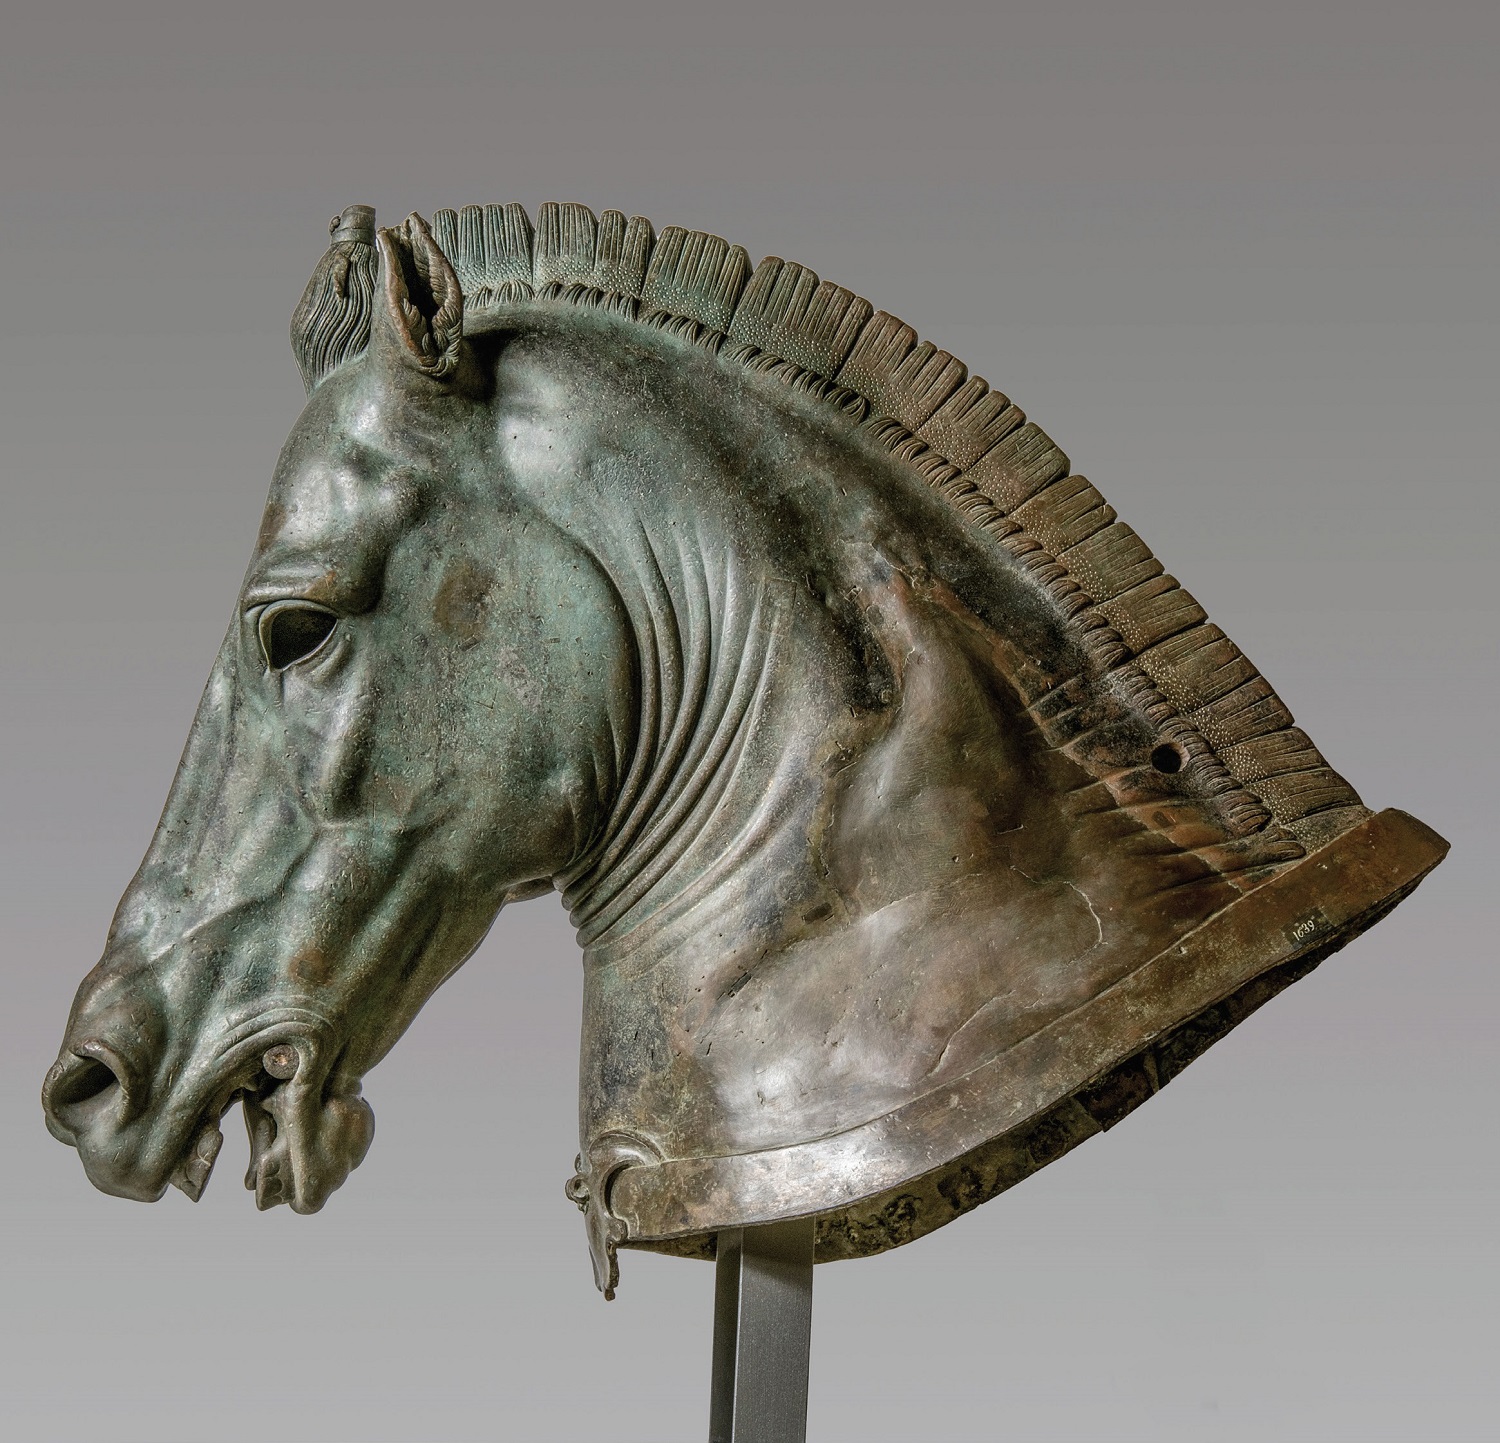 Riding through the time. The Art of horse riding. From Antiquity to the Middle Ages